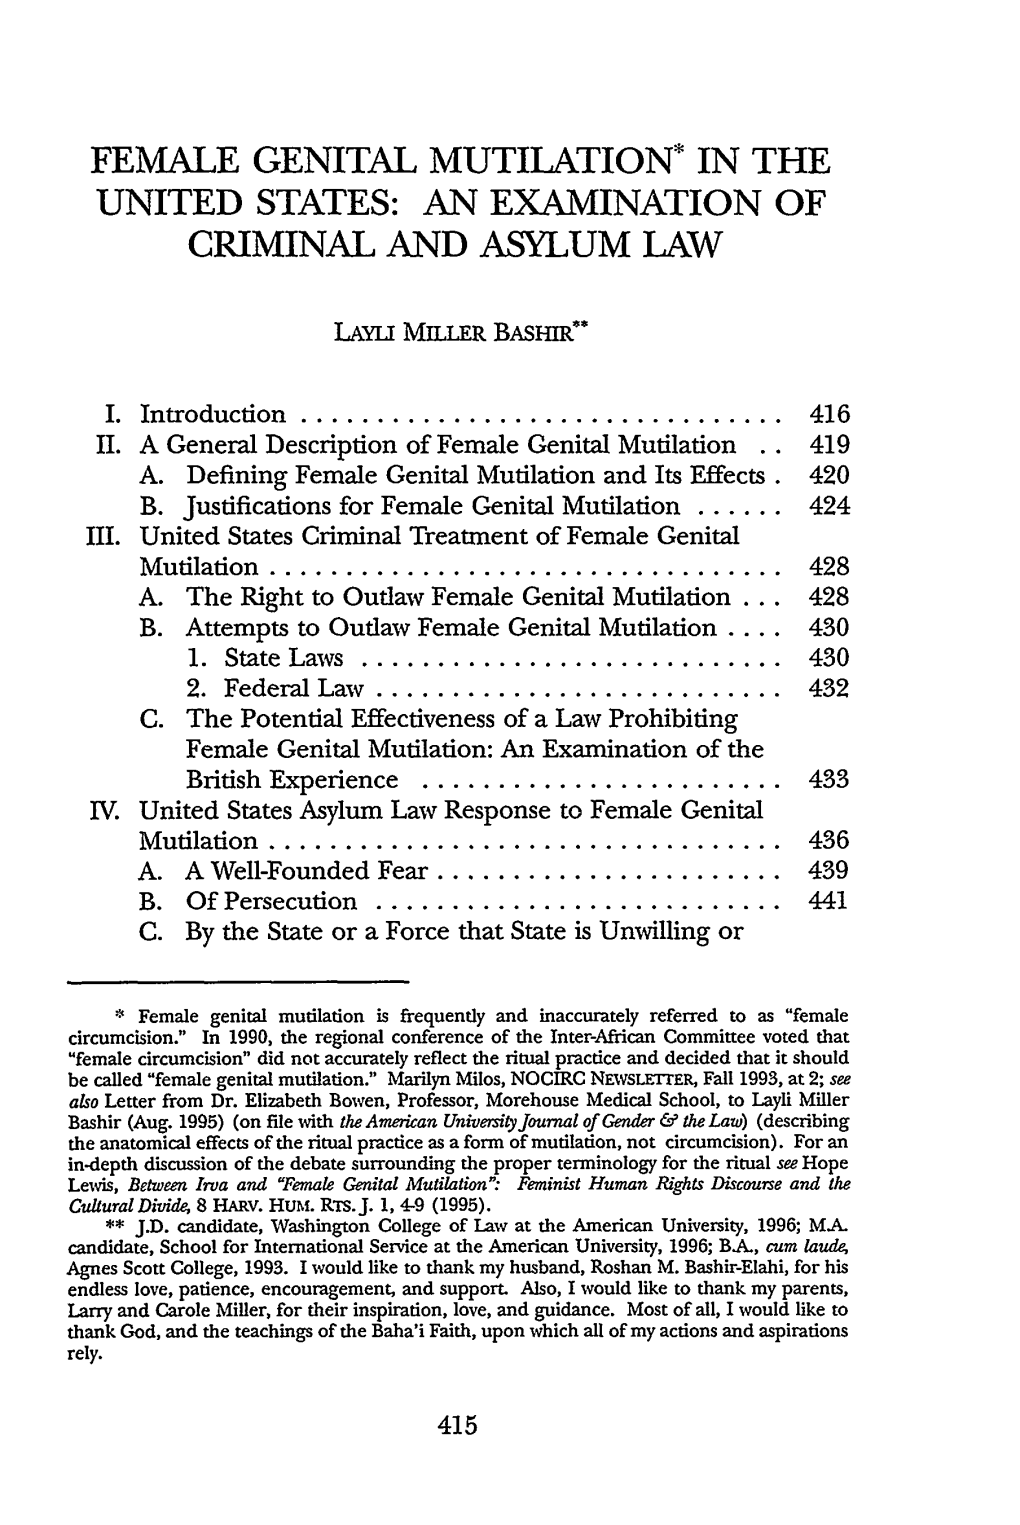 Female Genital Mutilation* in the United States: an Examination of Criminal and Asylum Law